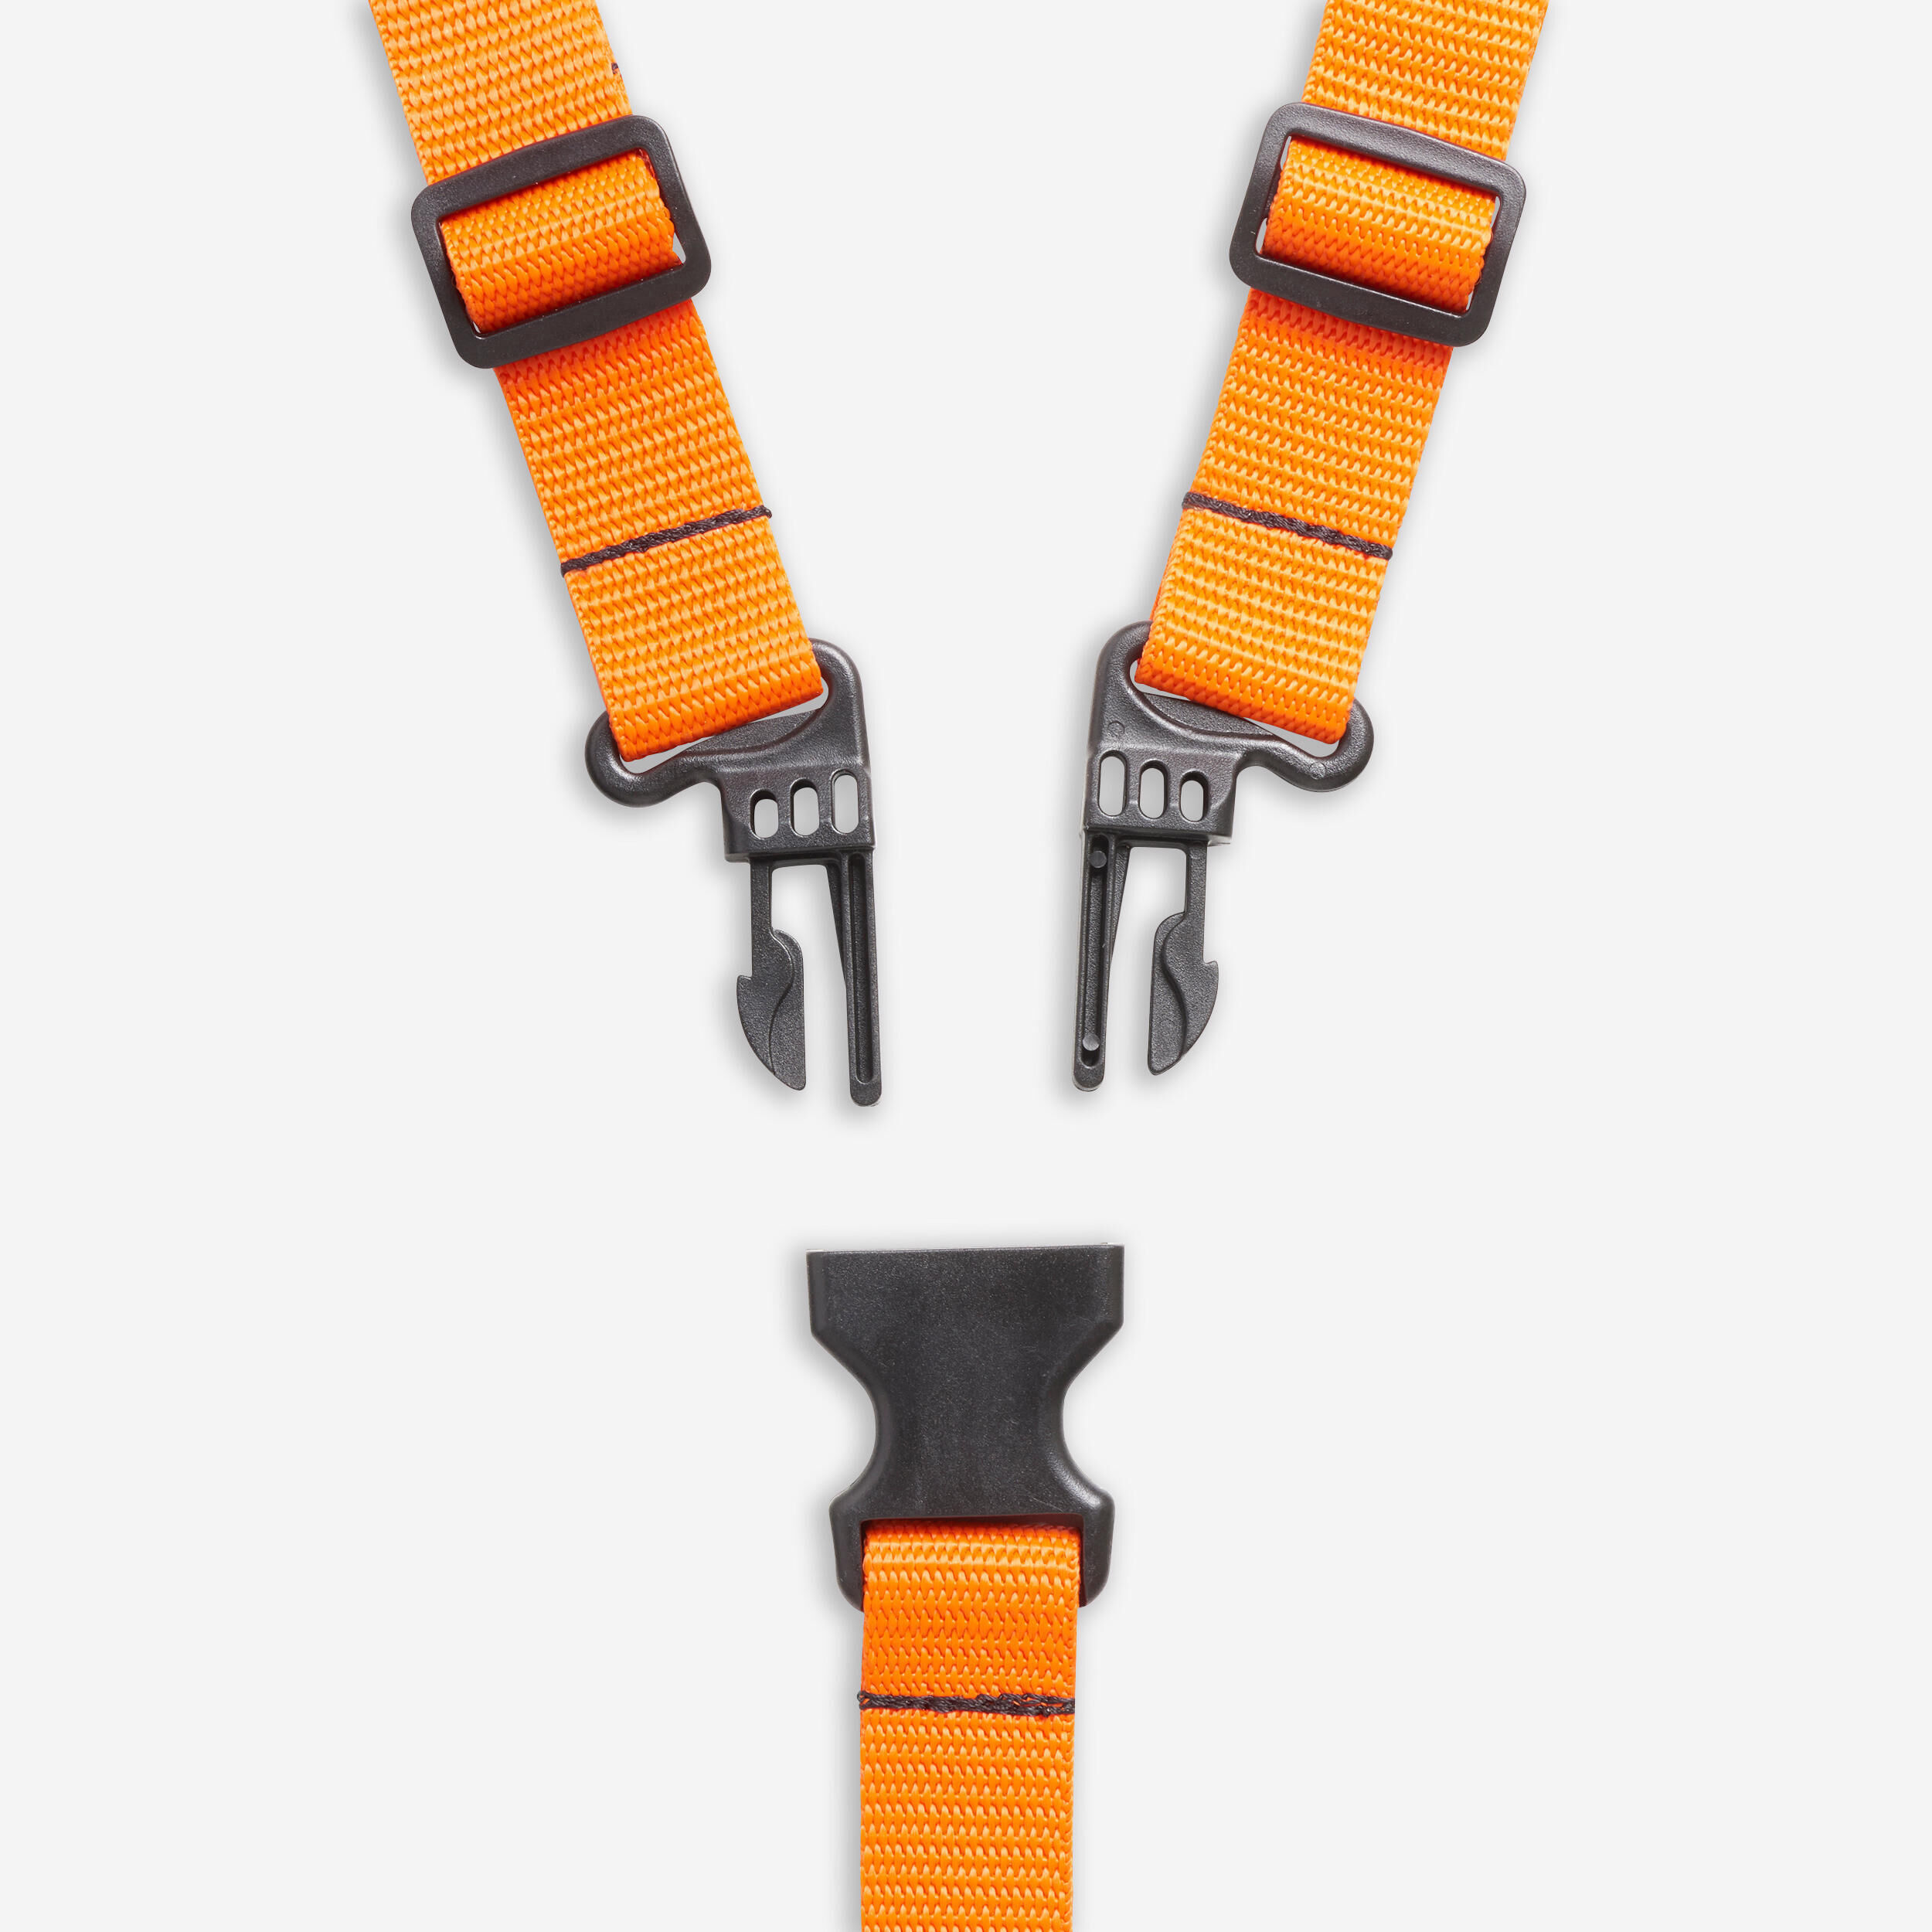 WEDZE 3-point harness for the Trilugik baby seat.